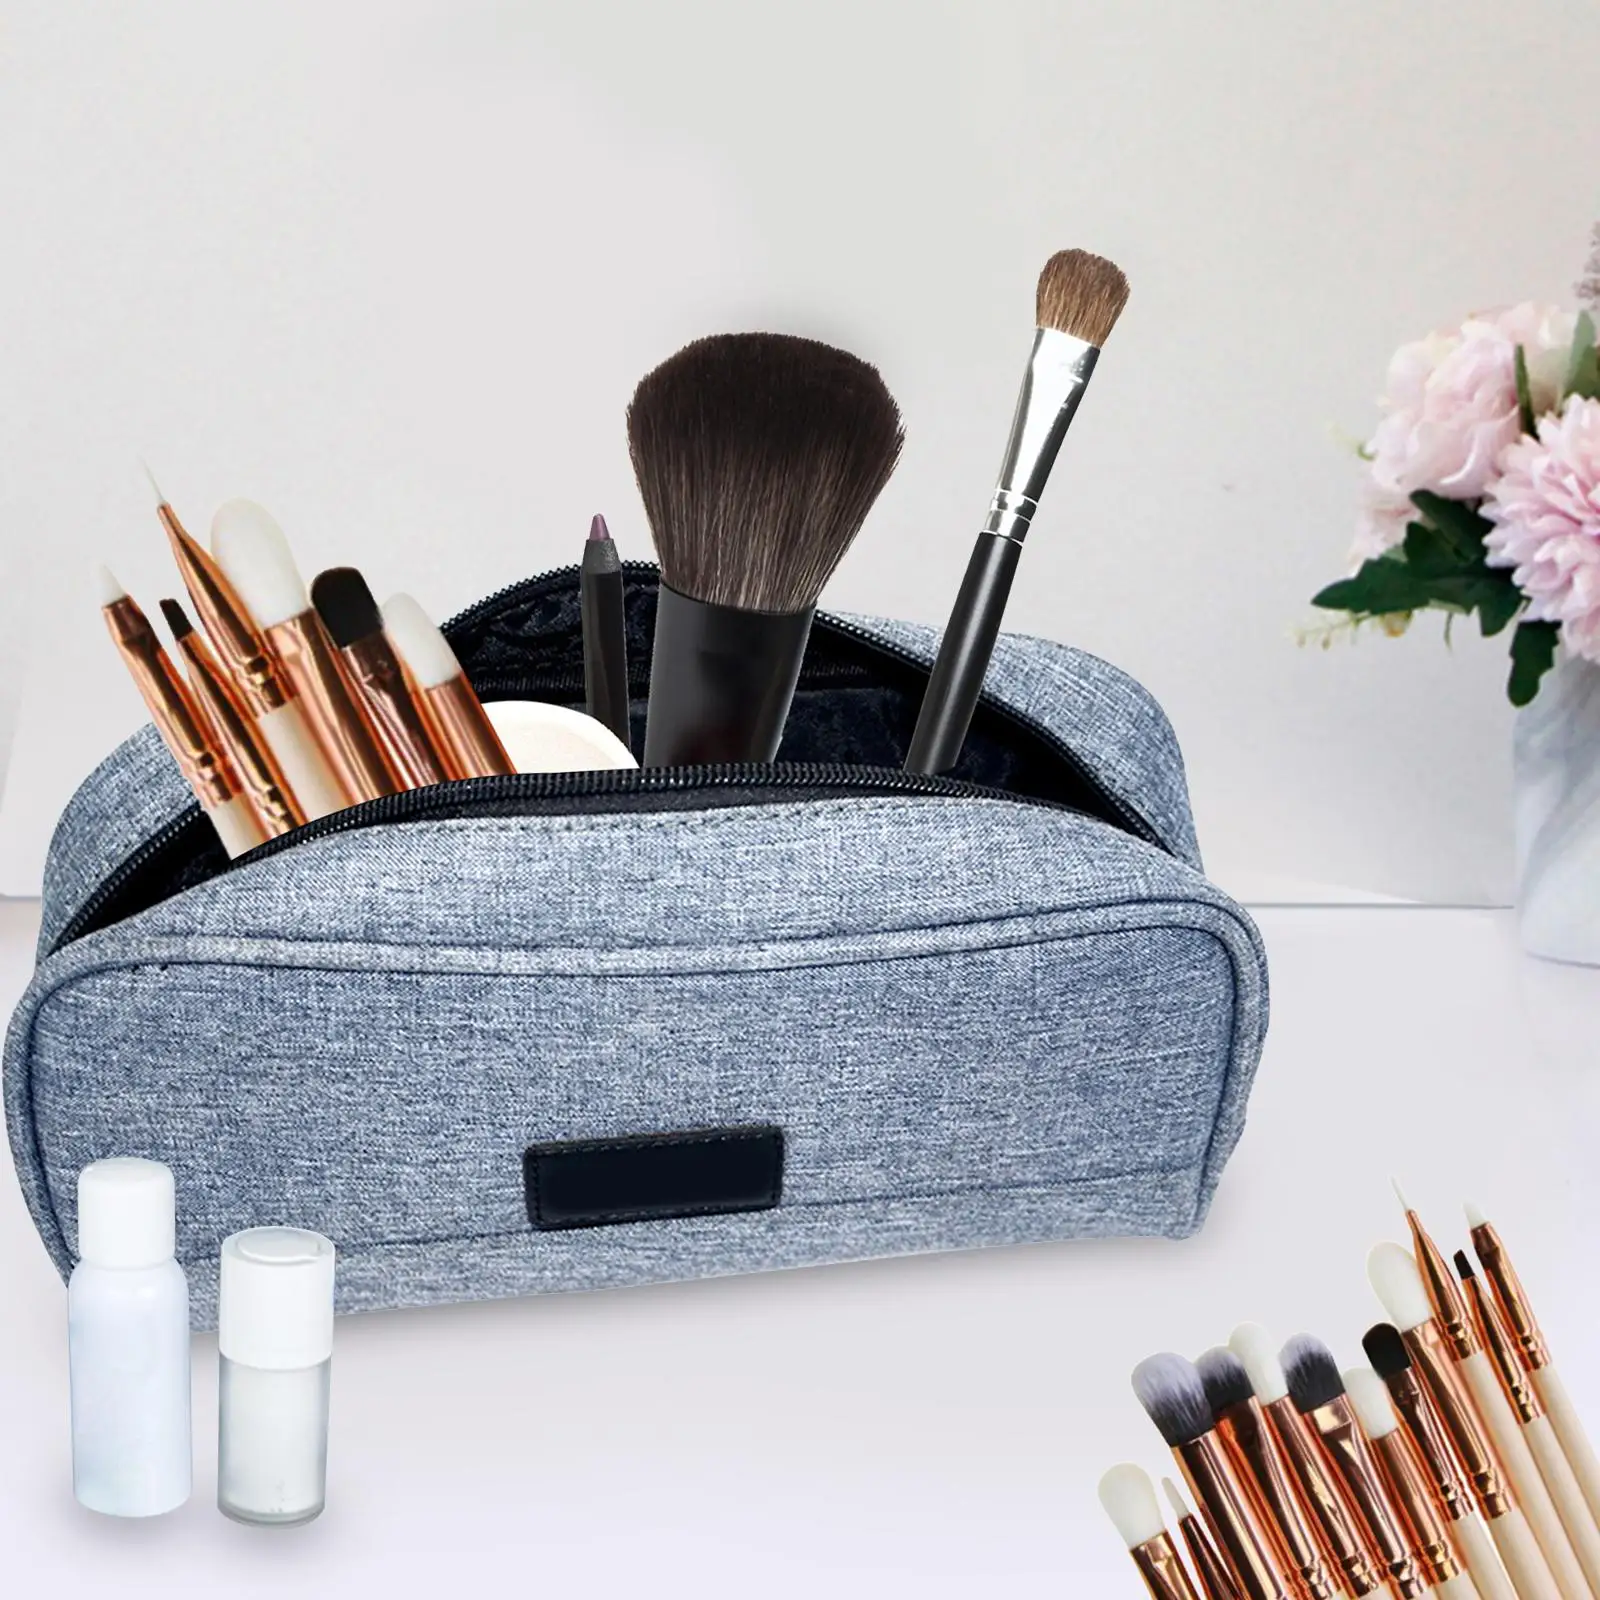 Small Toiletry Bag with Zipper for Men Women Makeup Bag Toothbrush Travel Case Storage Carrying Bag Organizer for Business Trip